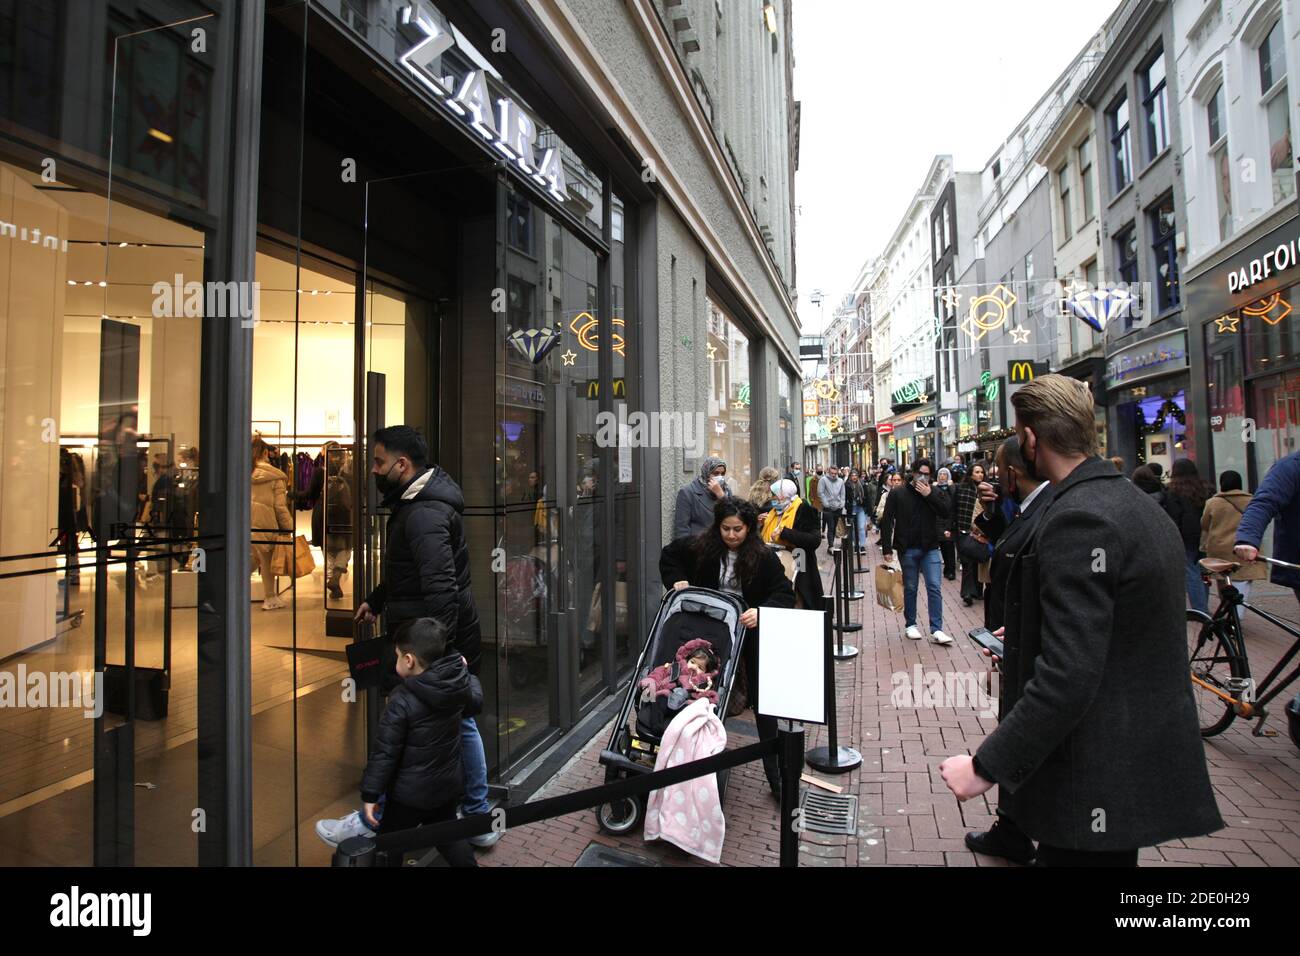 Consumers wait in line to enter in the Zara store during 